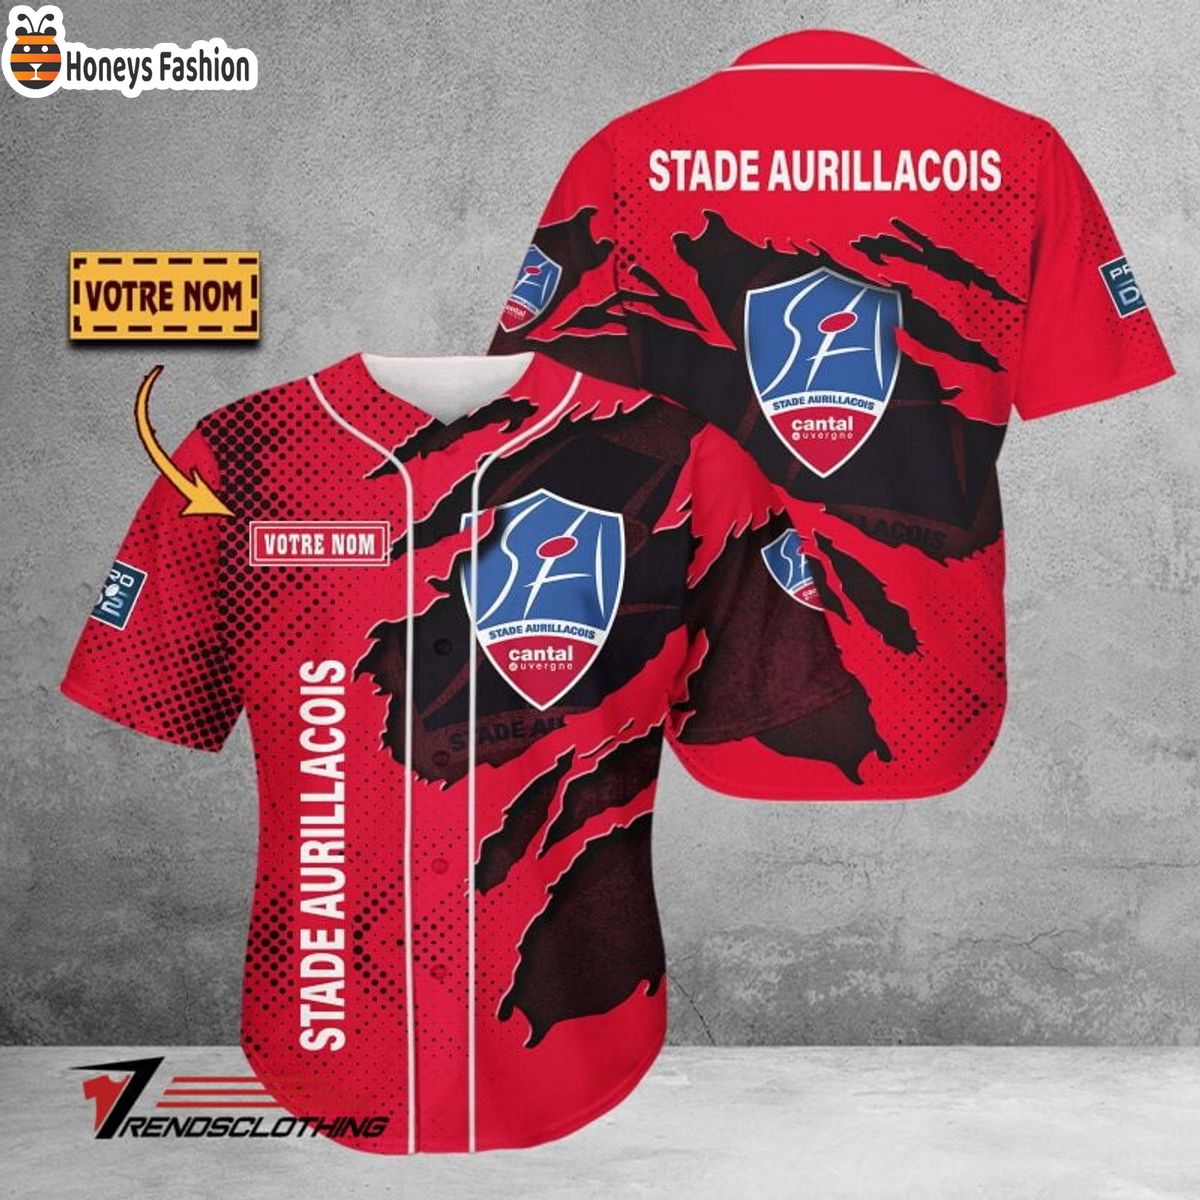 Stade Aurillacois Cantal Auvergne Personalized Baseball Jersey